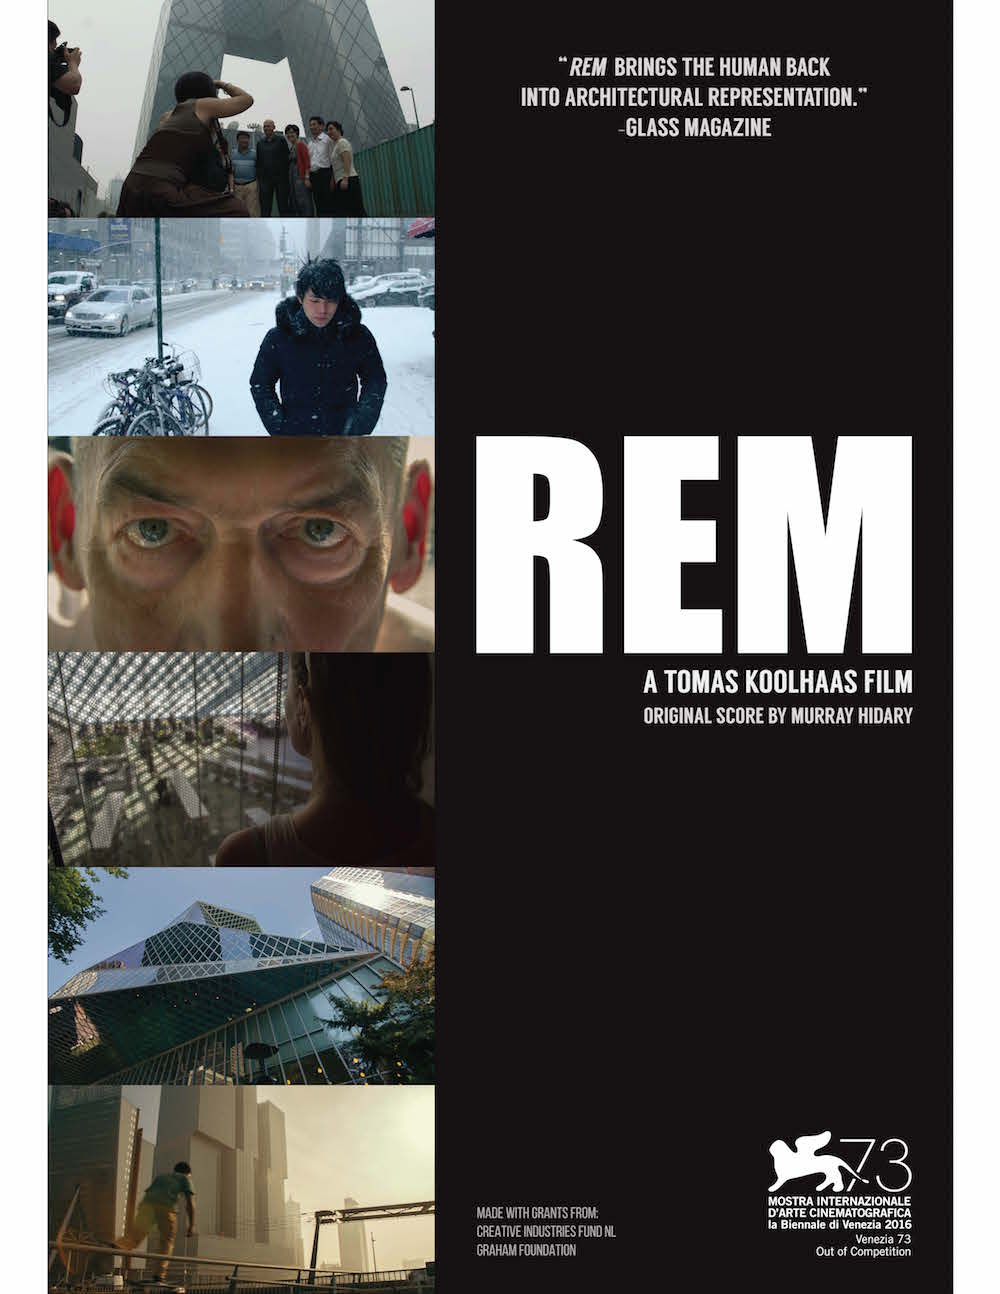 REM a documentary by Tomas Koolhaas